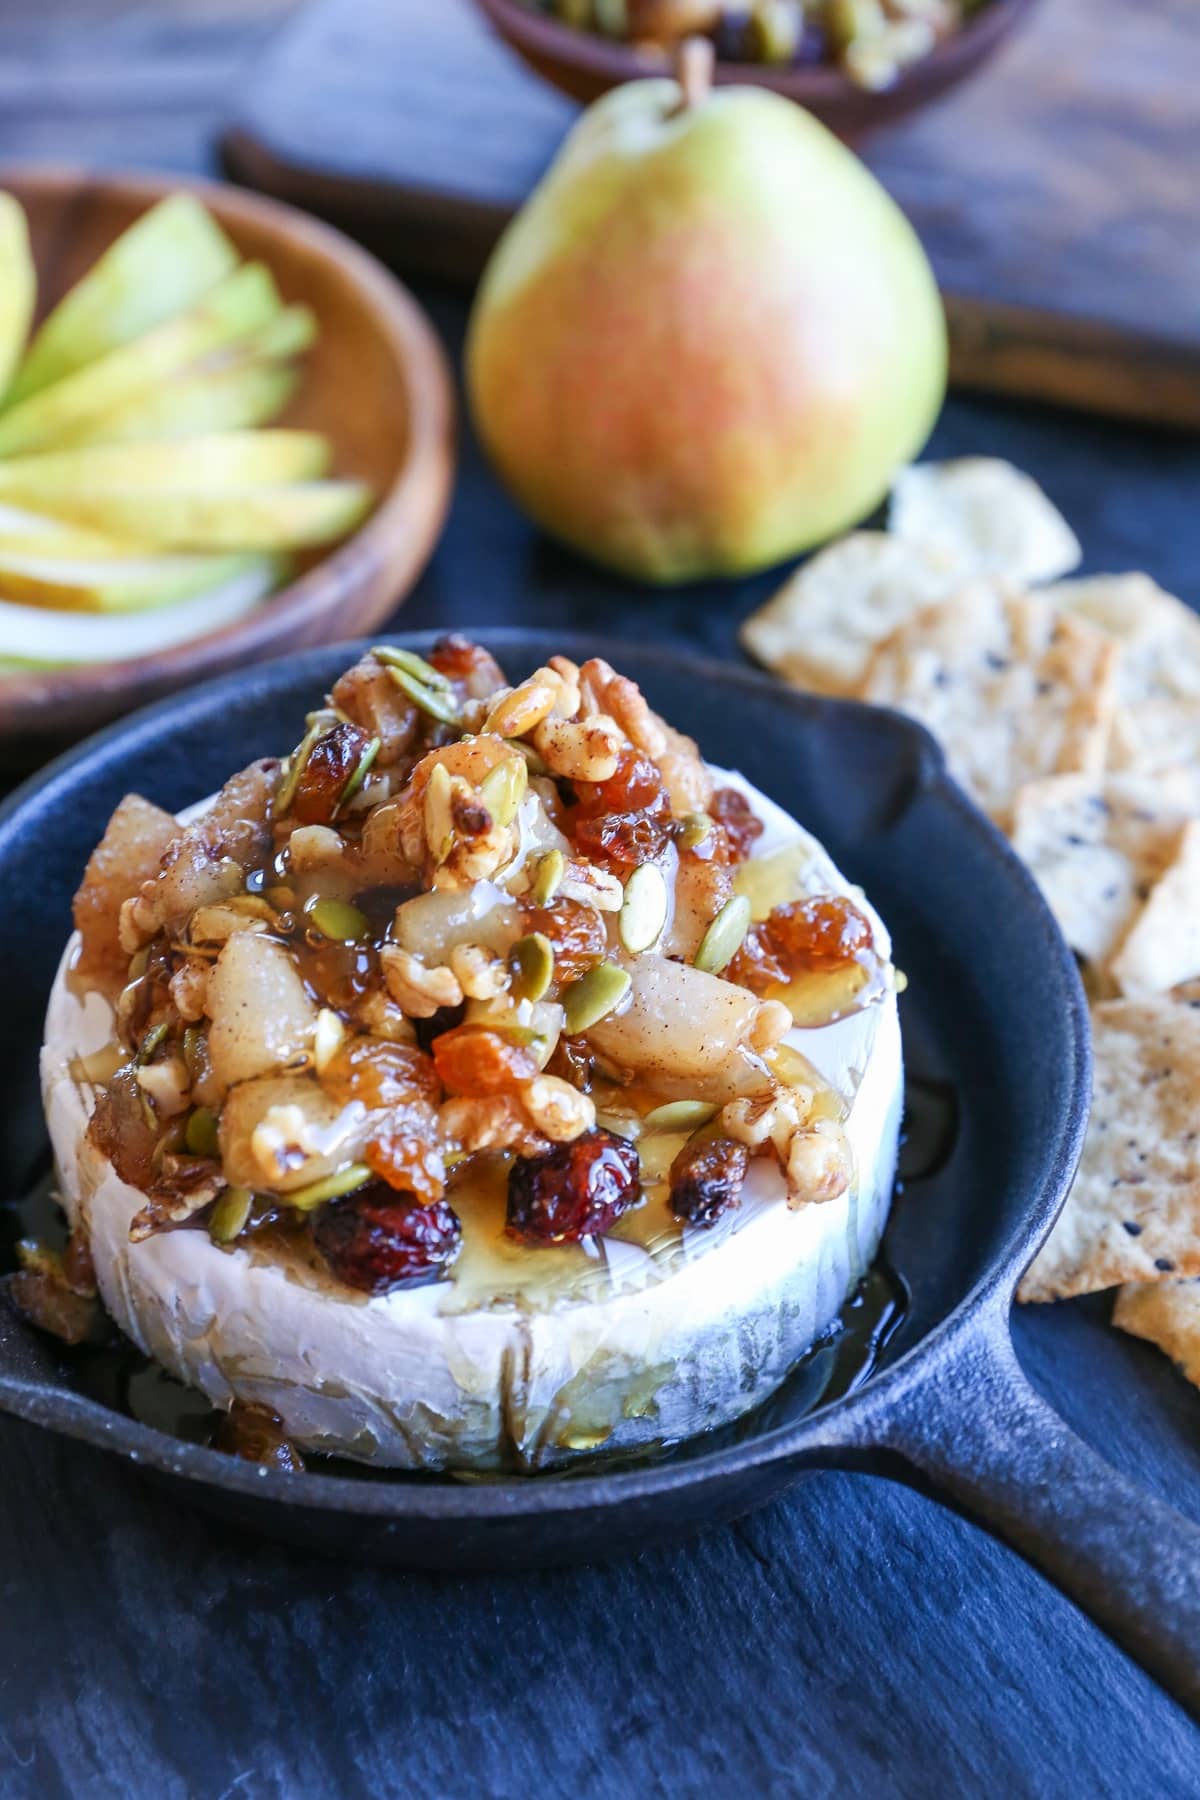 Maple-Spiced Pear Baked Brie with Walnuts, Pumpkin Seeds, and Golden Raisins